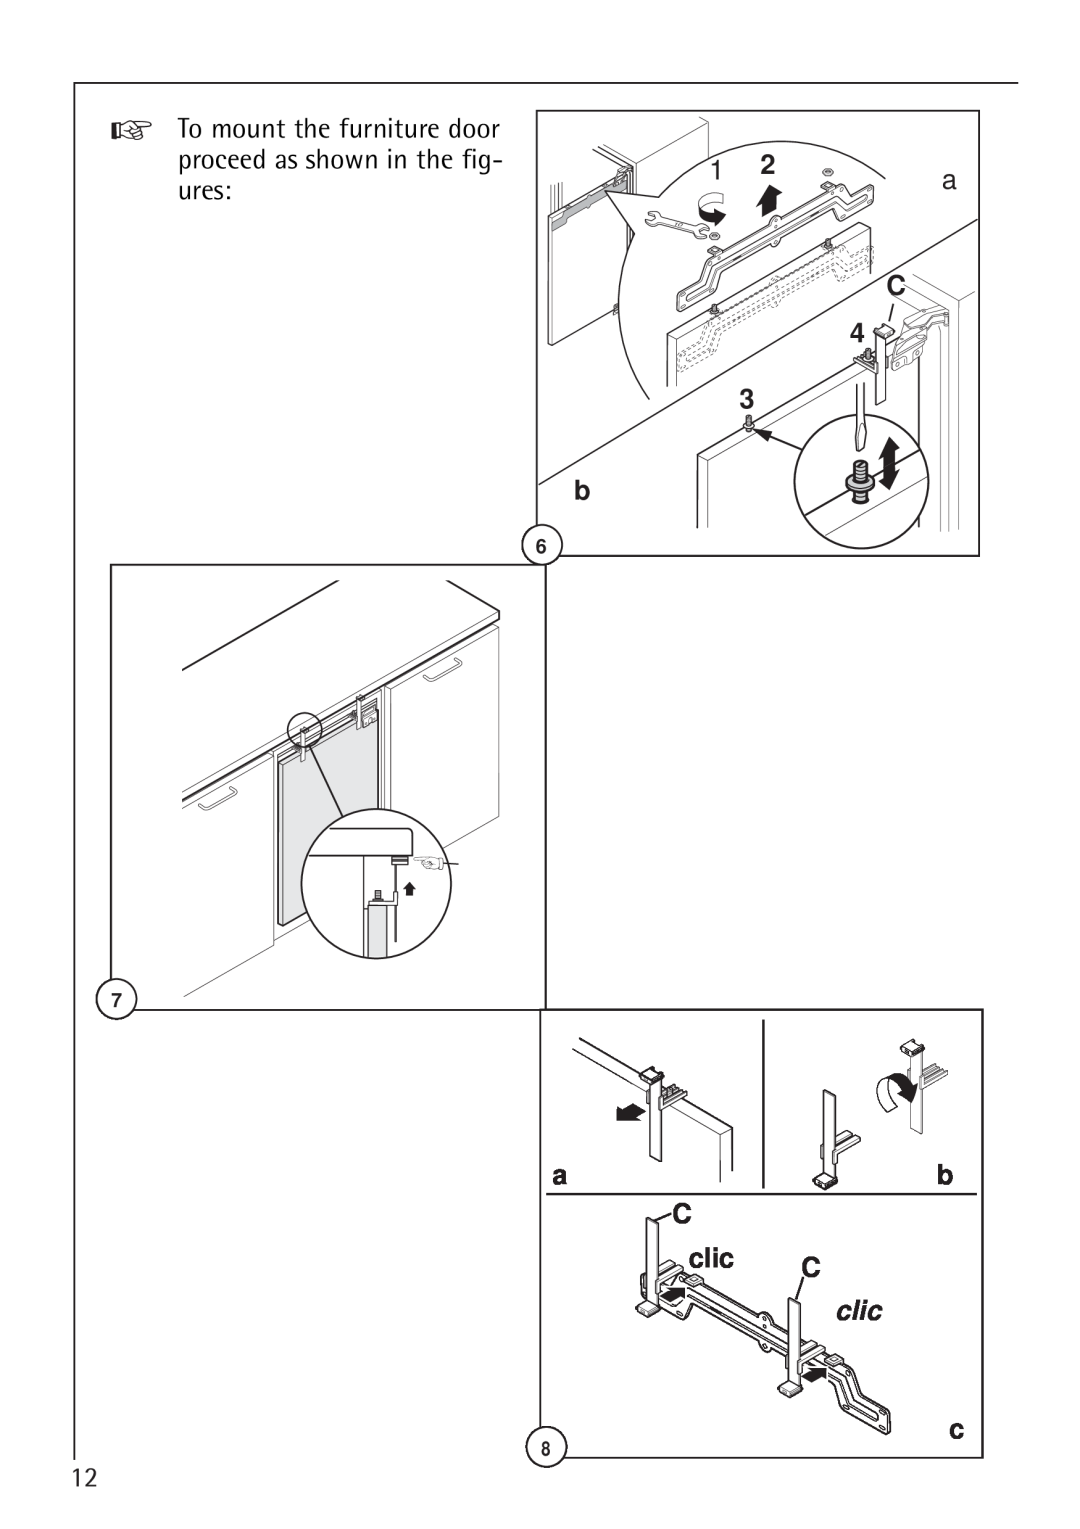 Electrolux 66050i installation instructions To mount the furniture door, proceed as shown in the fig, ures, clic 